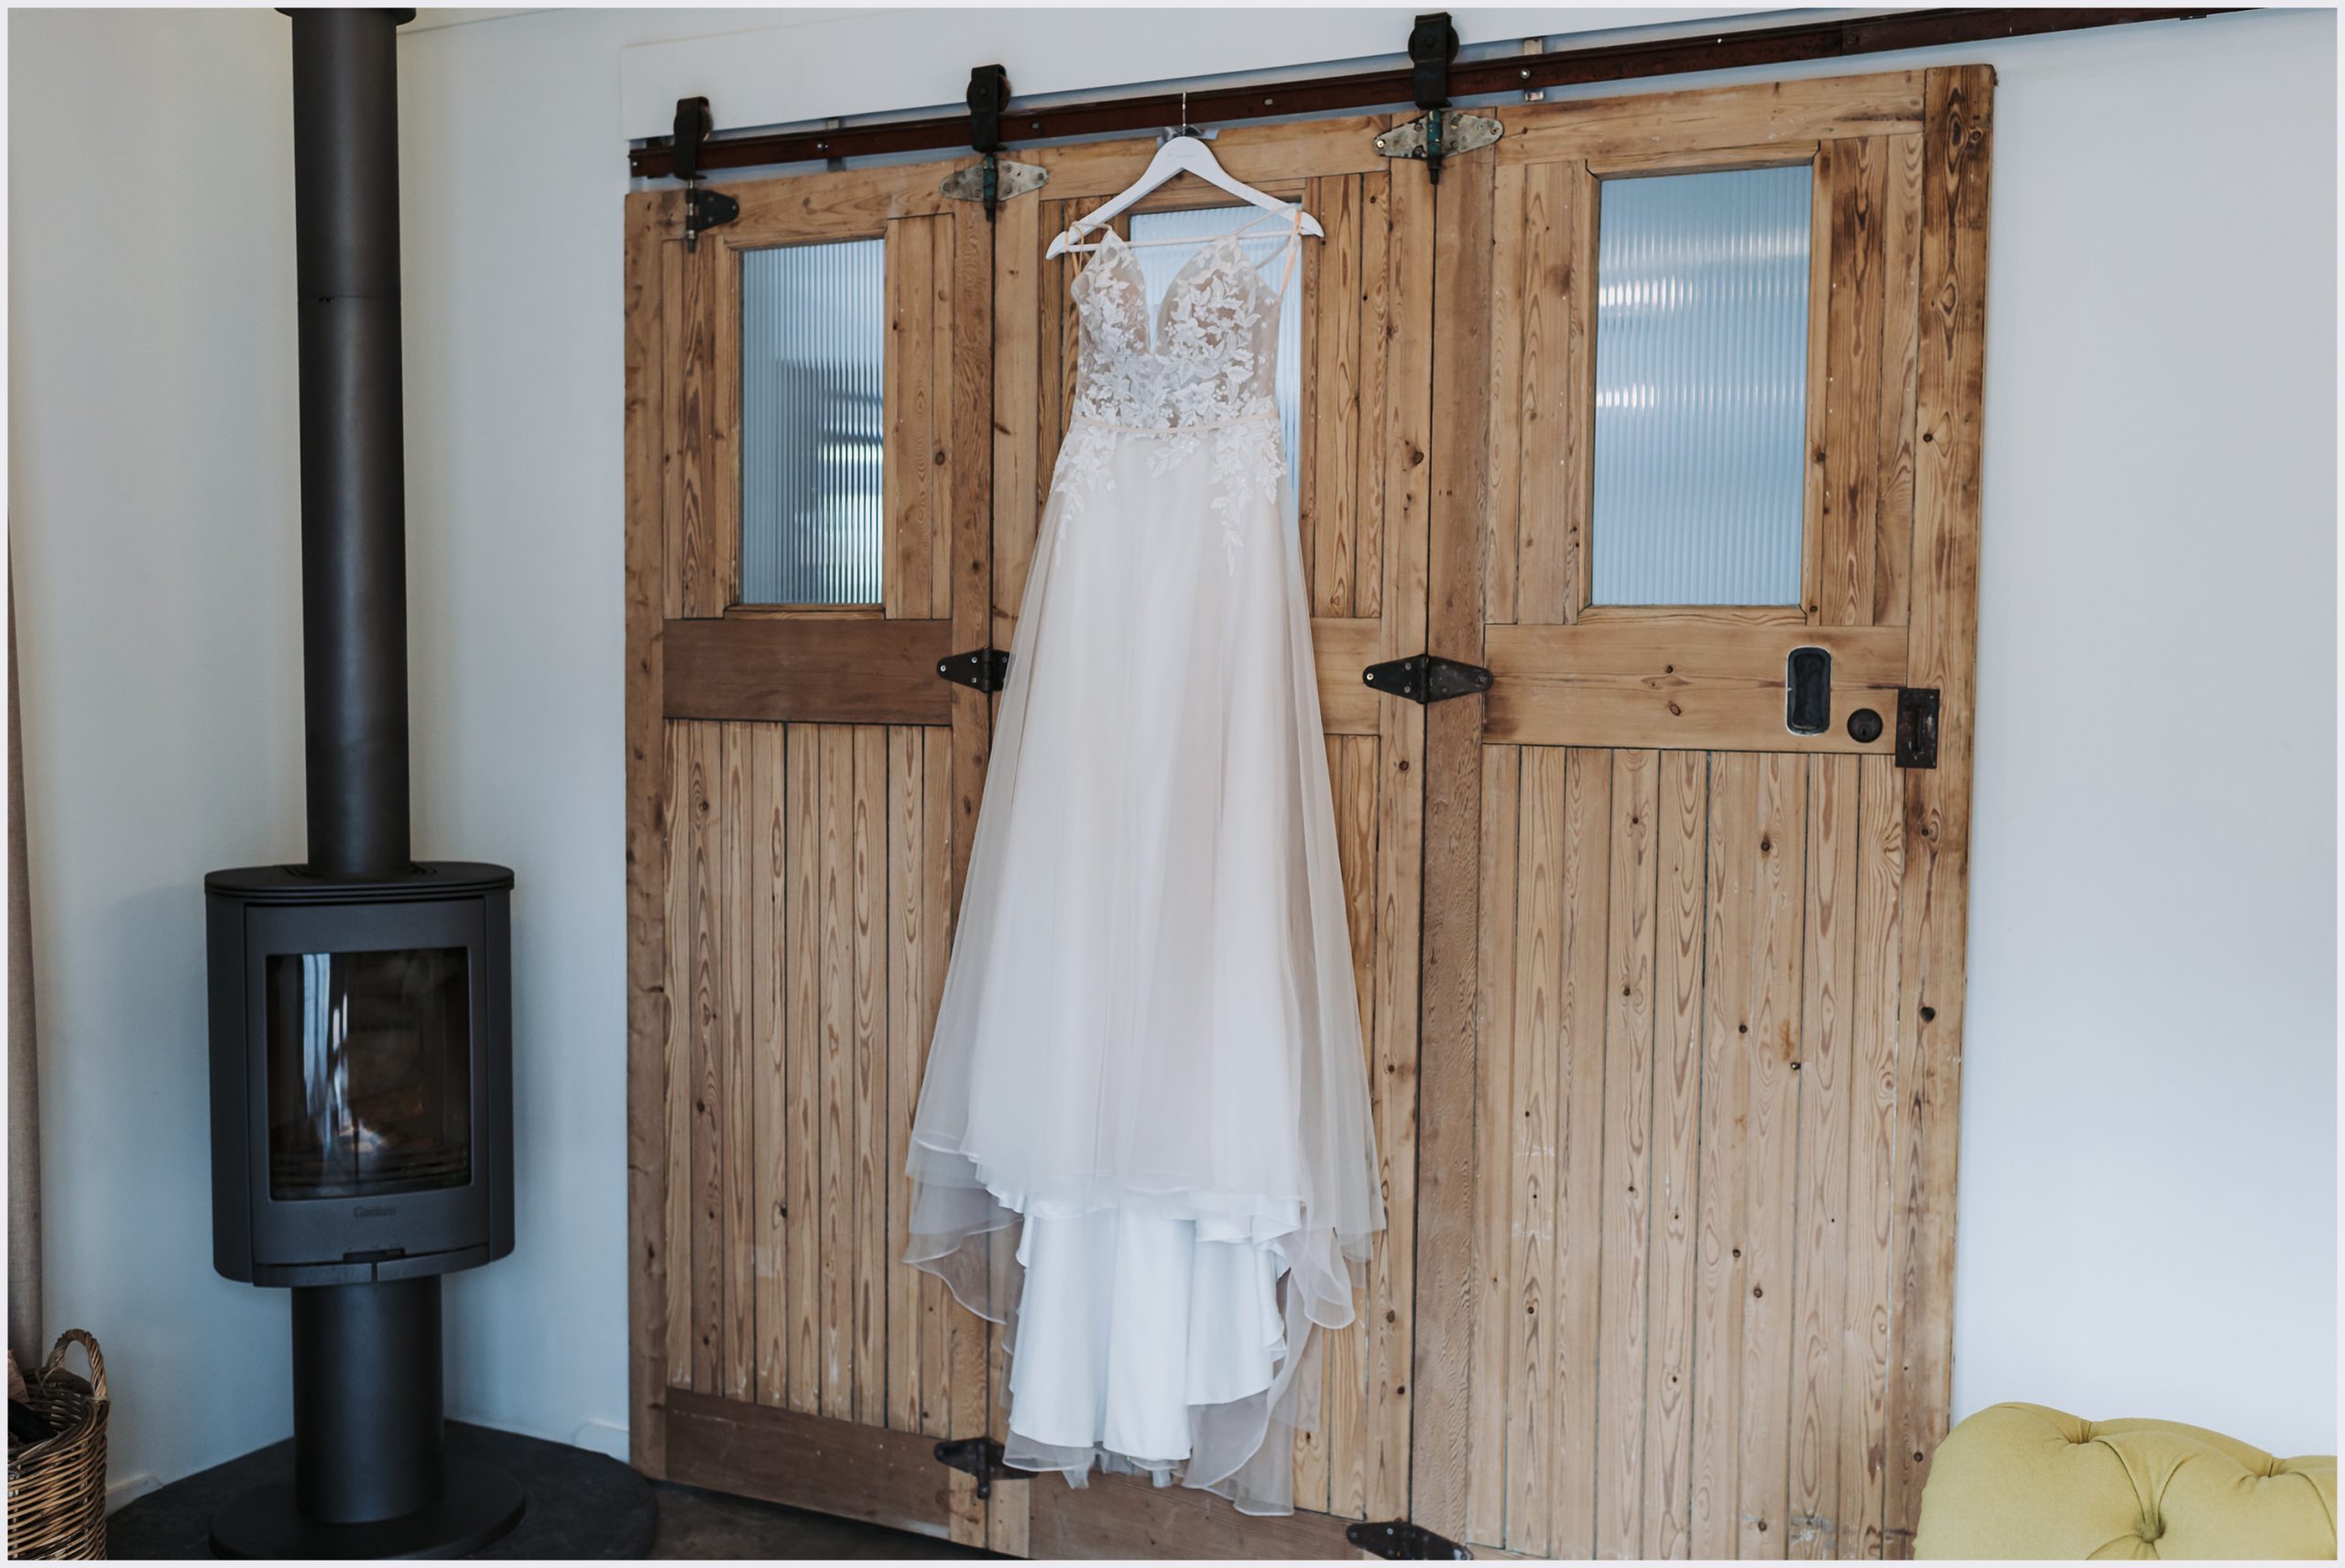 Bride's stunning lace wedding dress with a long train hanging on the rustic stable doors of a converted barn taken by north Wales wedding photographer Helena Jayne Photography